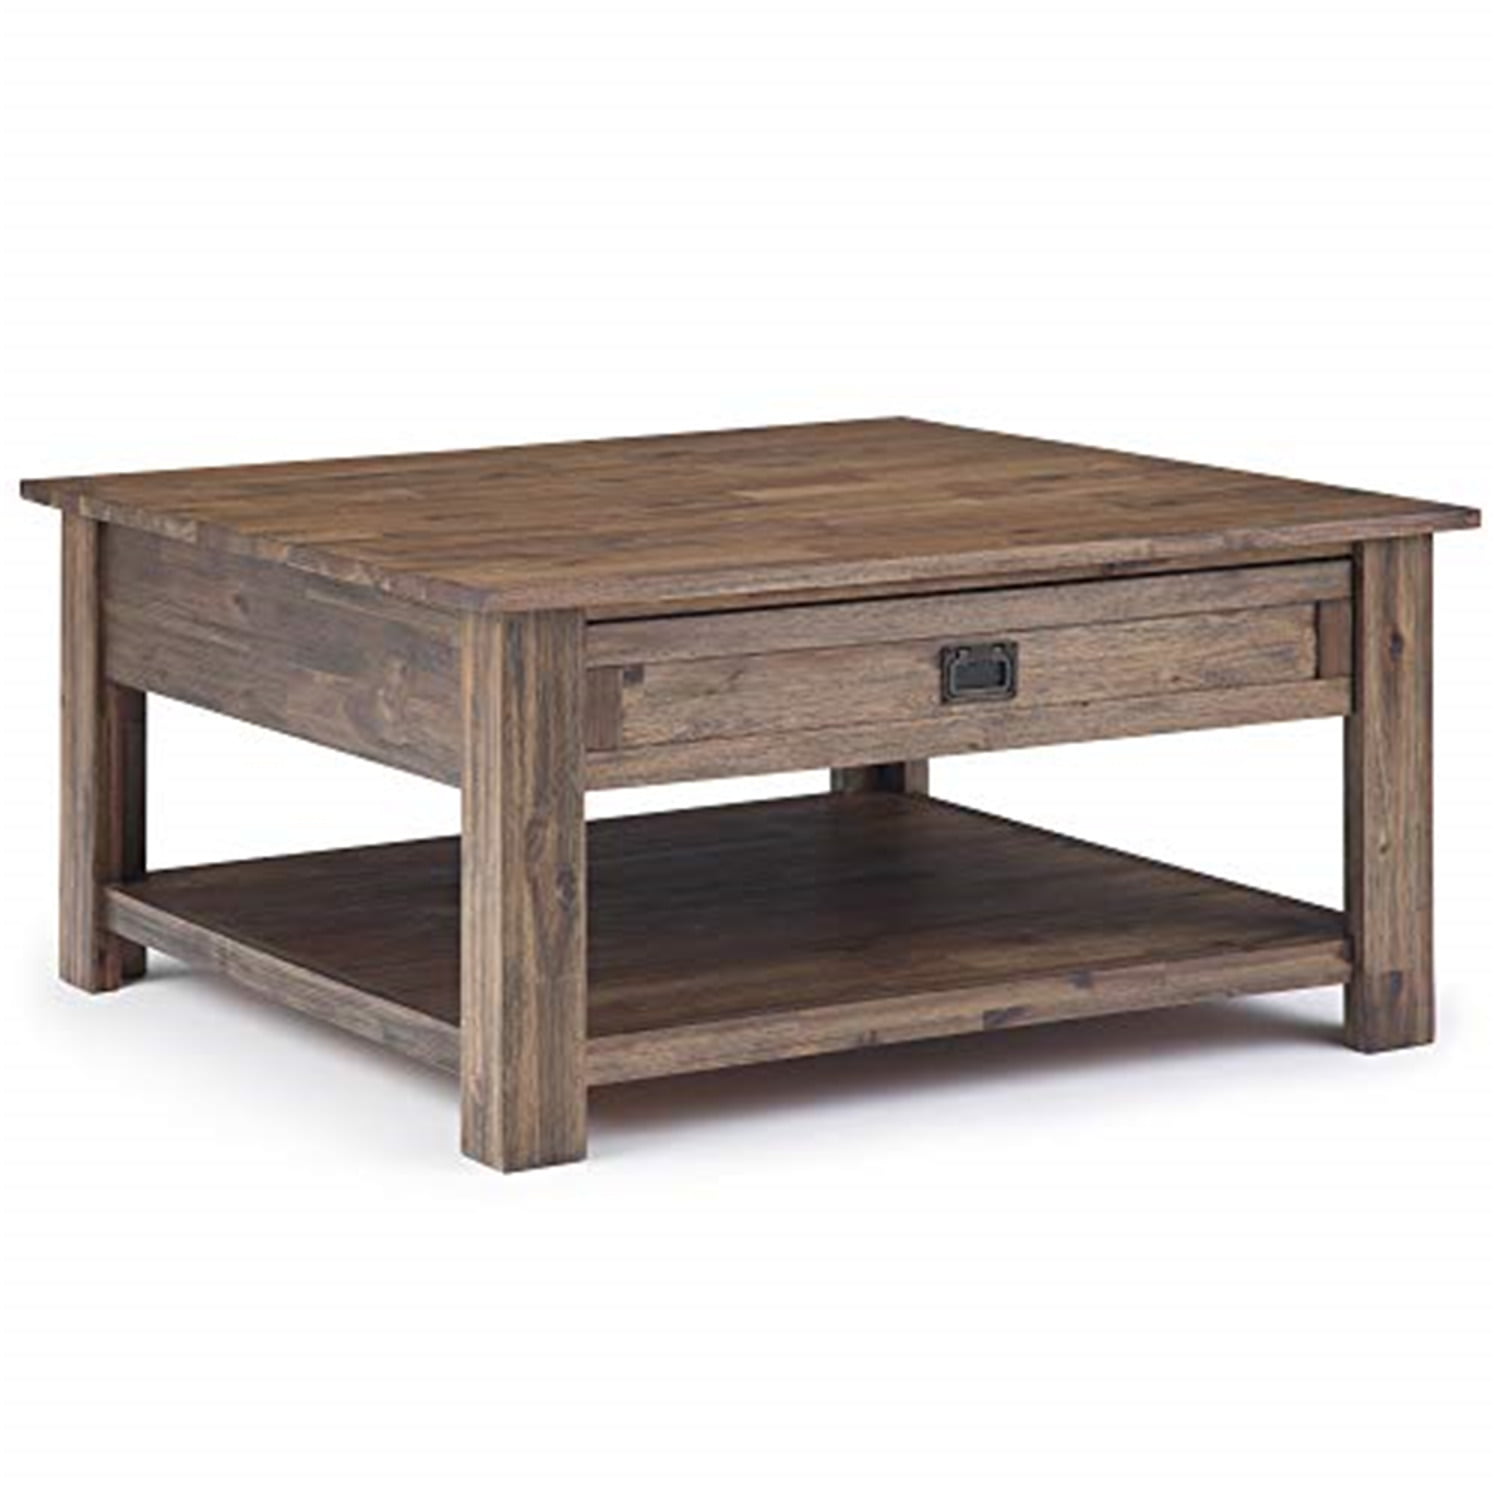 Wide Square Rustic Coffee Table, Long Coffee Tables With Storage